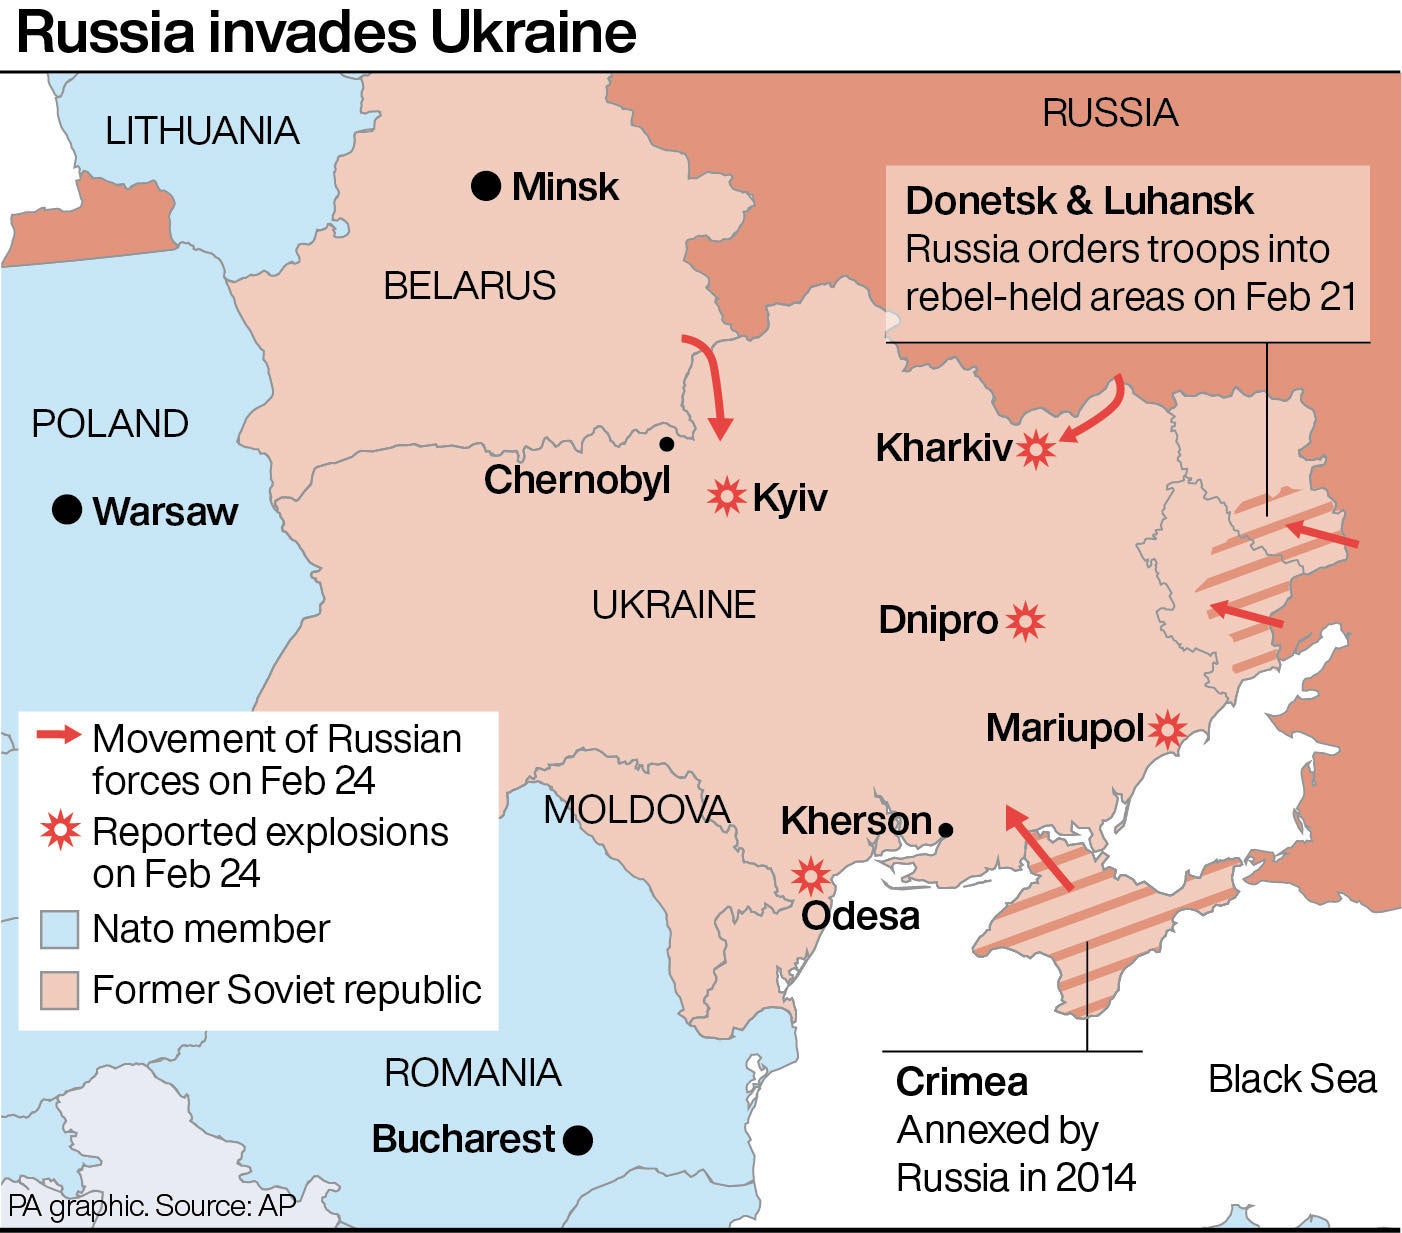 This map details Russia’s advancement on Ukraine